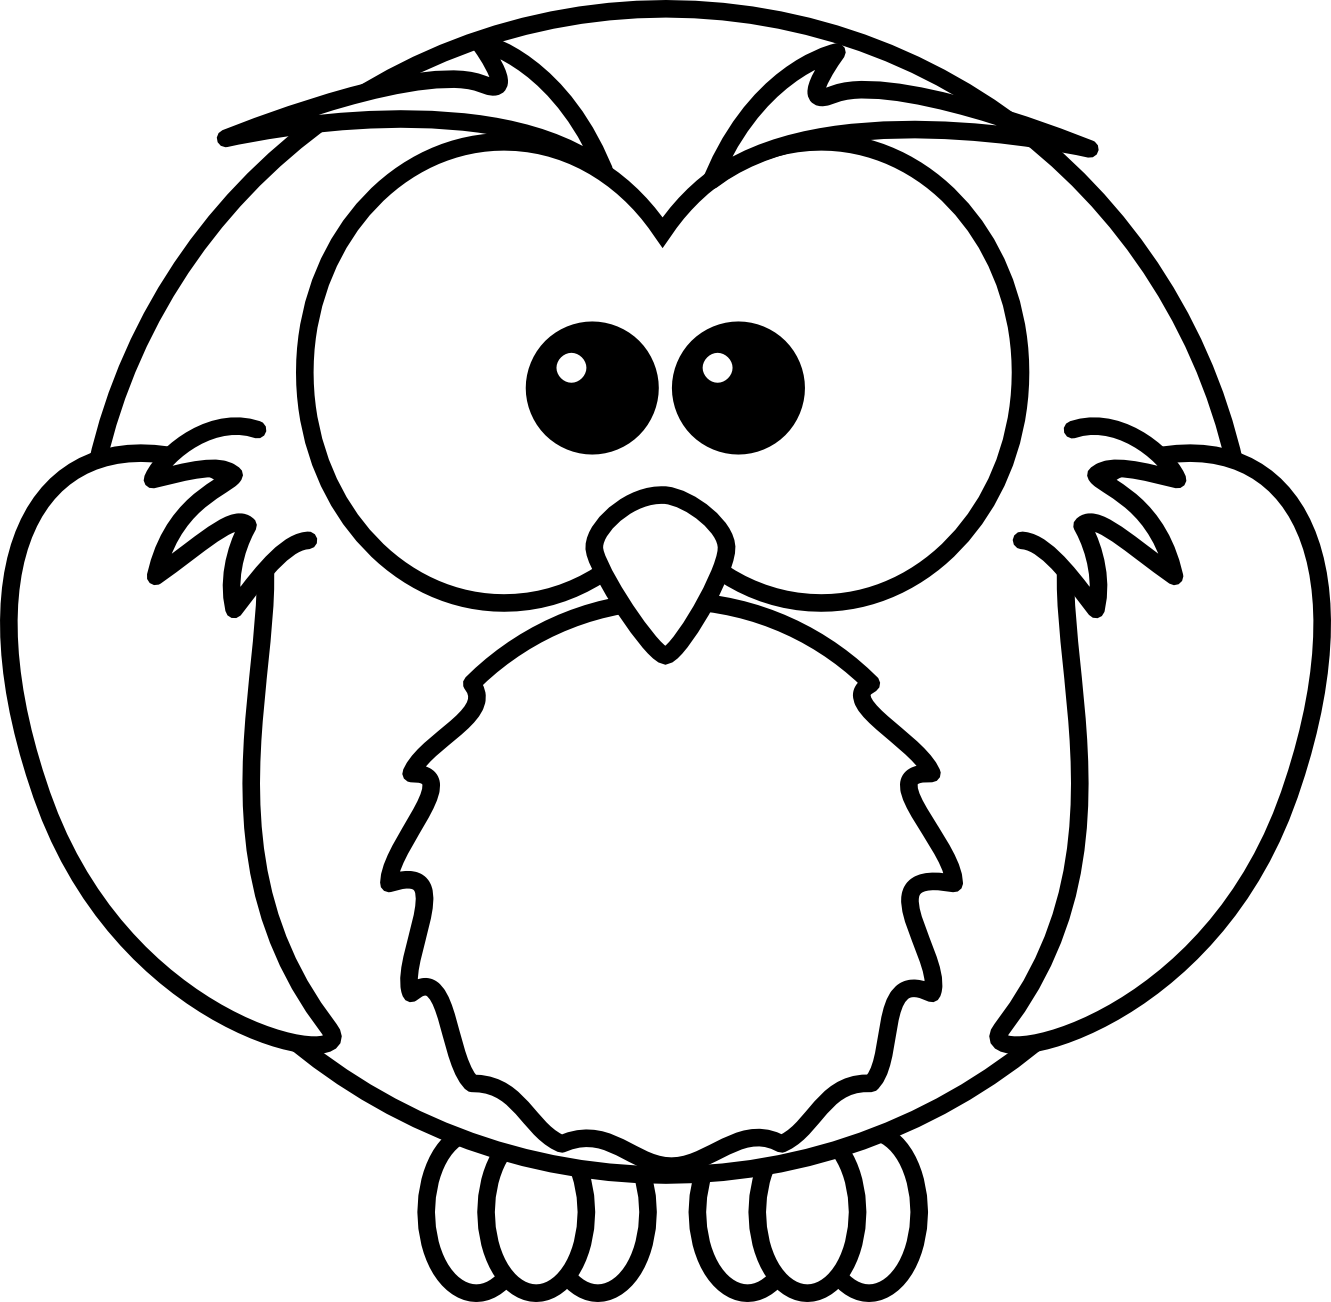 Owl Book Clipart - Free Clipart Images